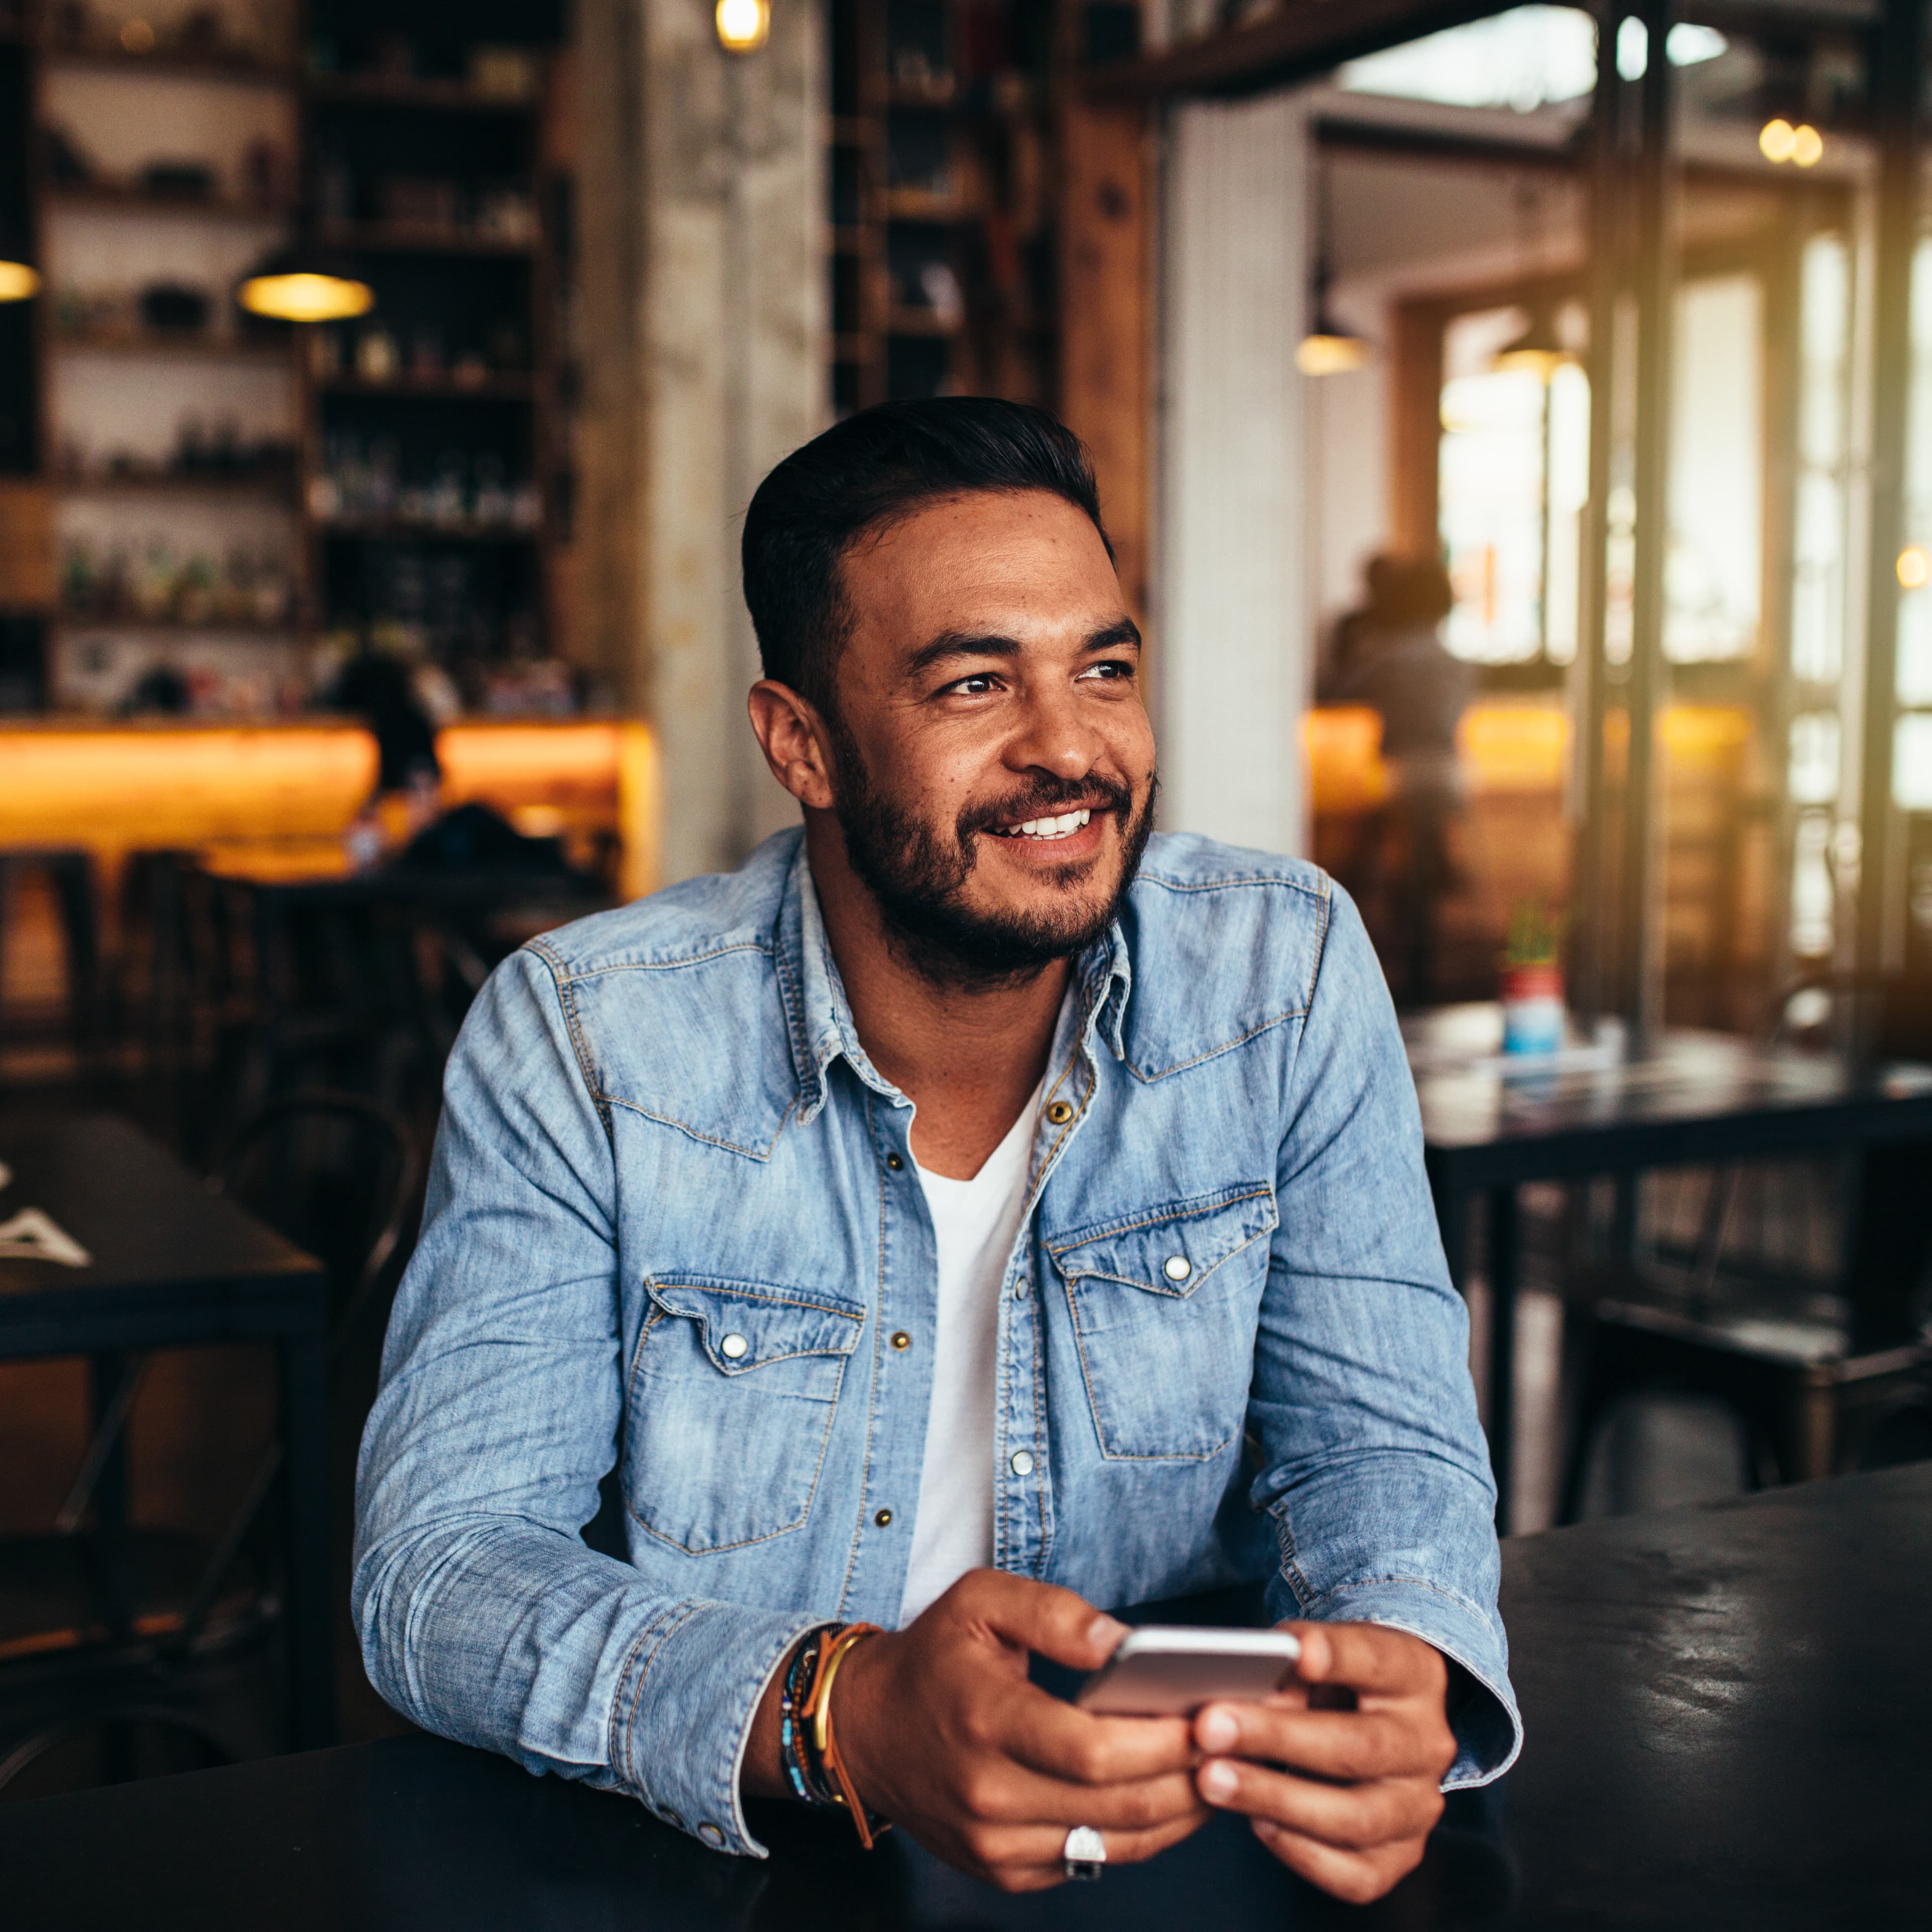 young man smiling sitting in restaurant holding his phone